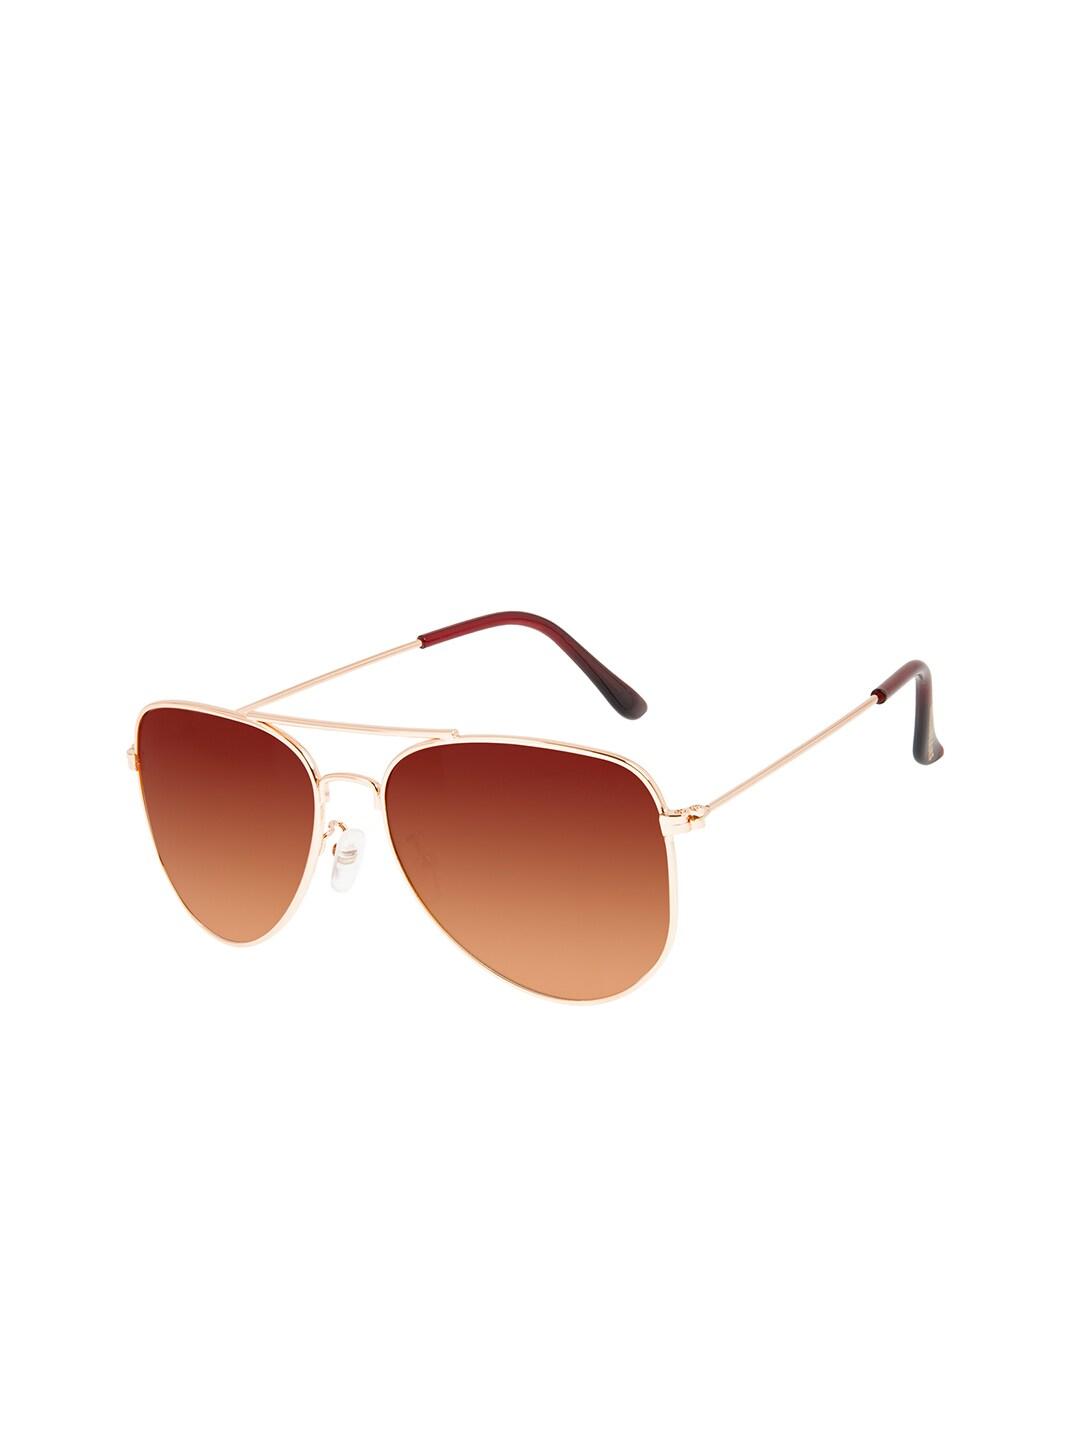 Chilli Beans Brown Lens & Gold-Toned Aviator Sunglasses with UV Protected Lens